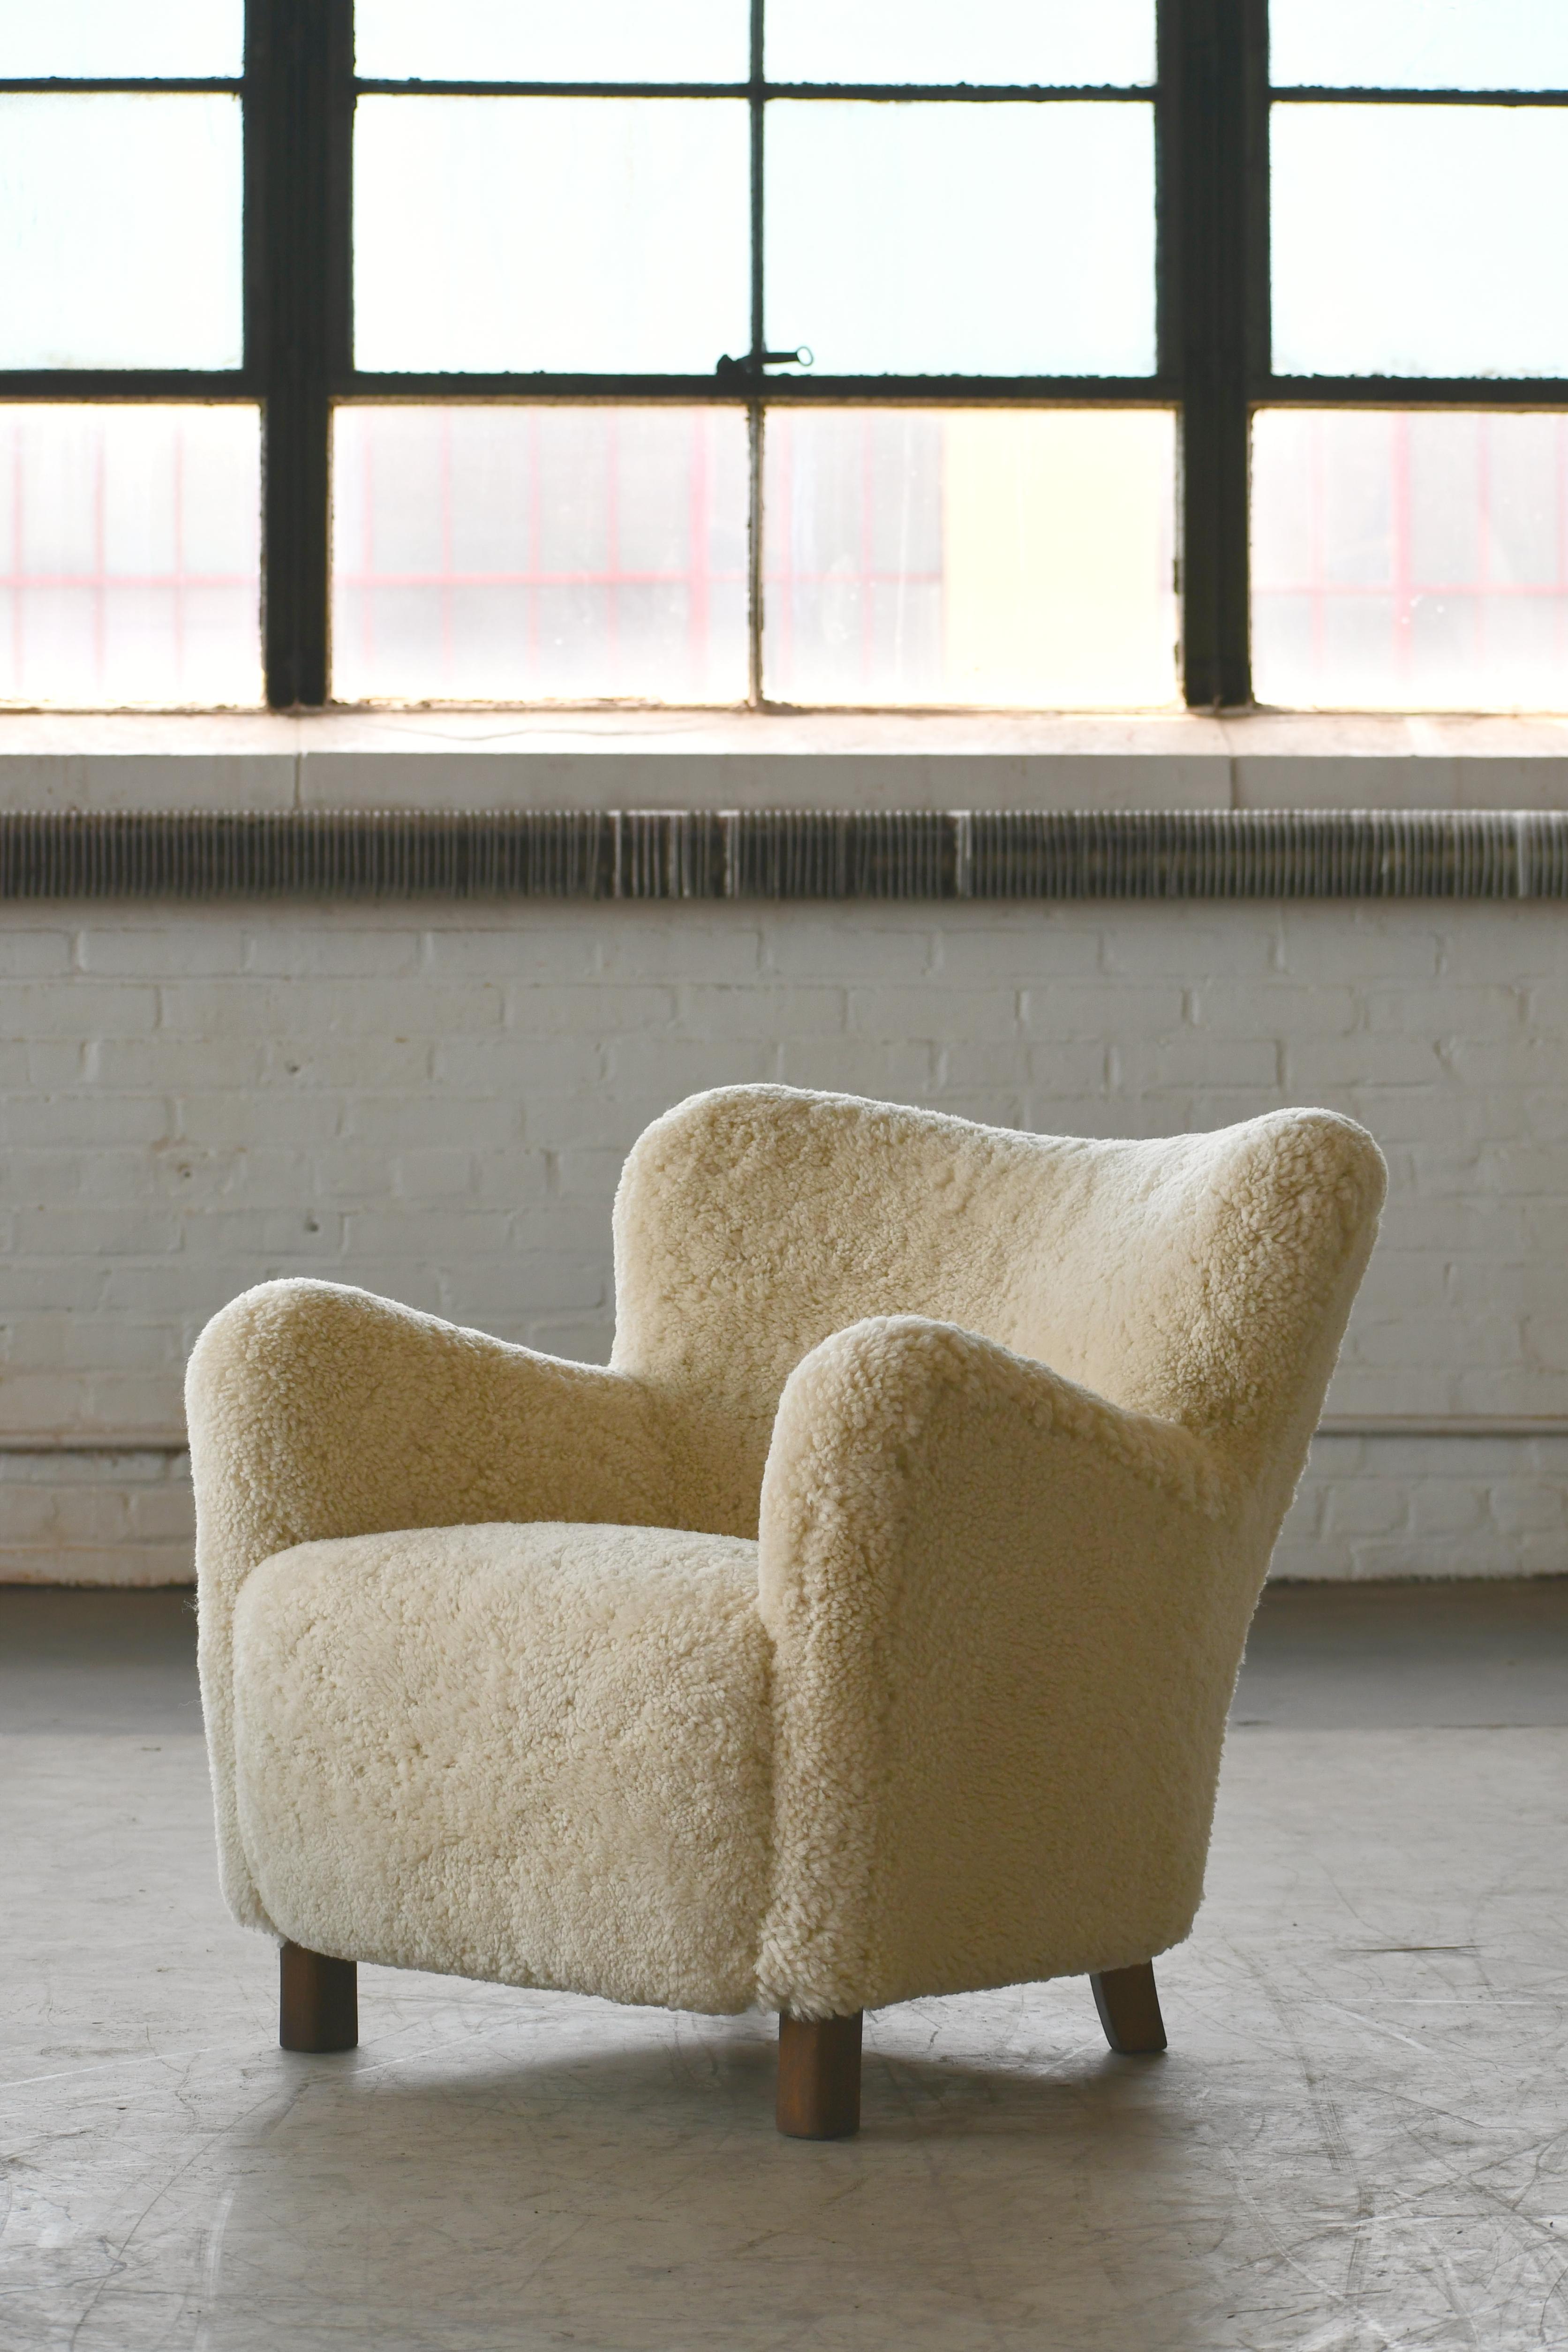 shearling chairs